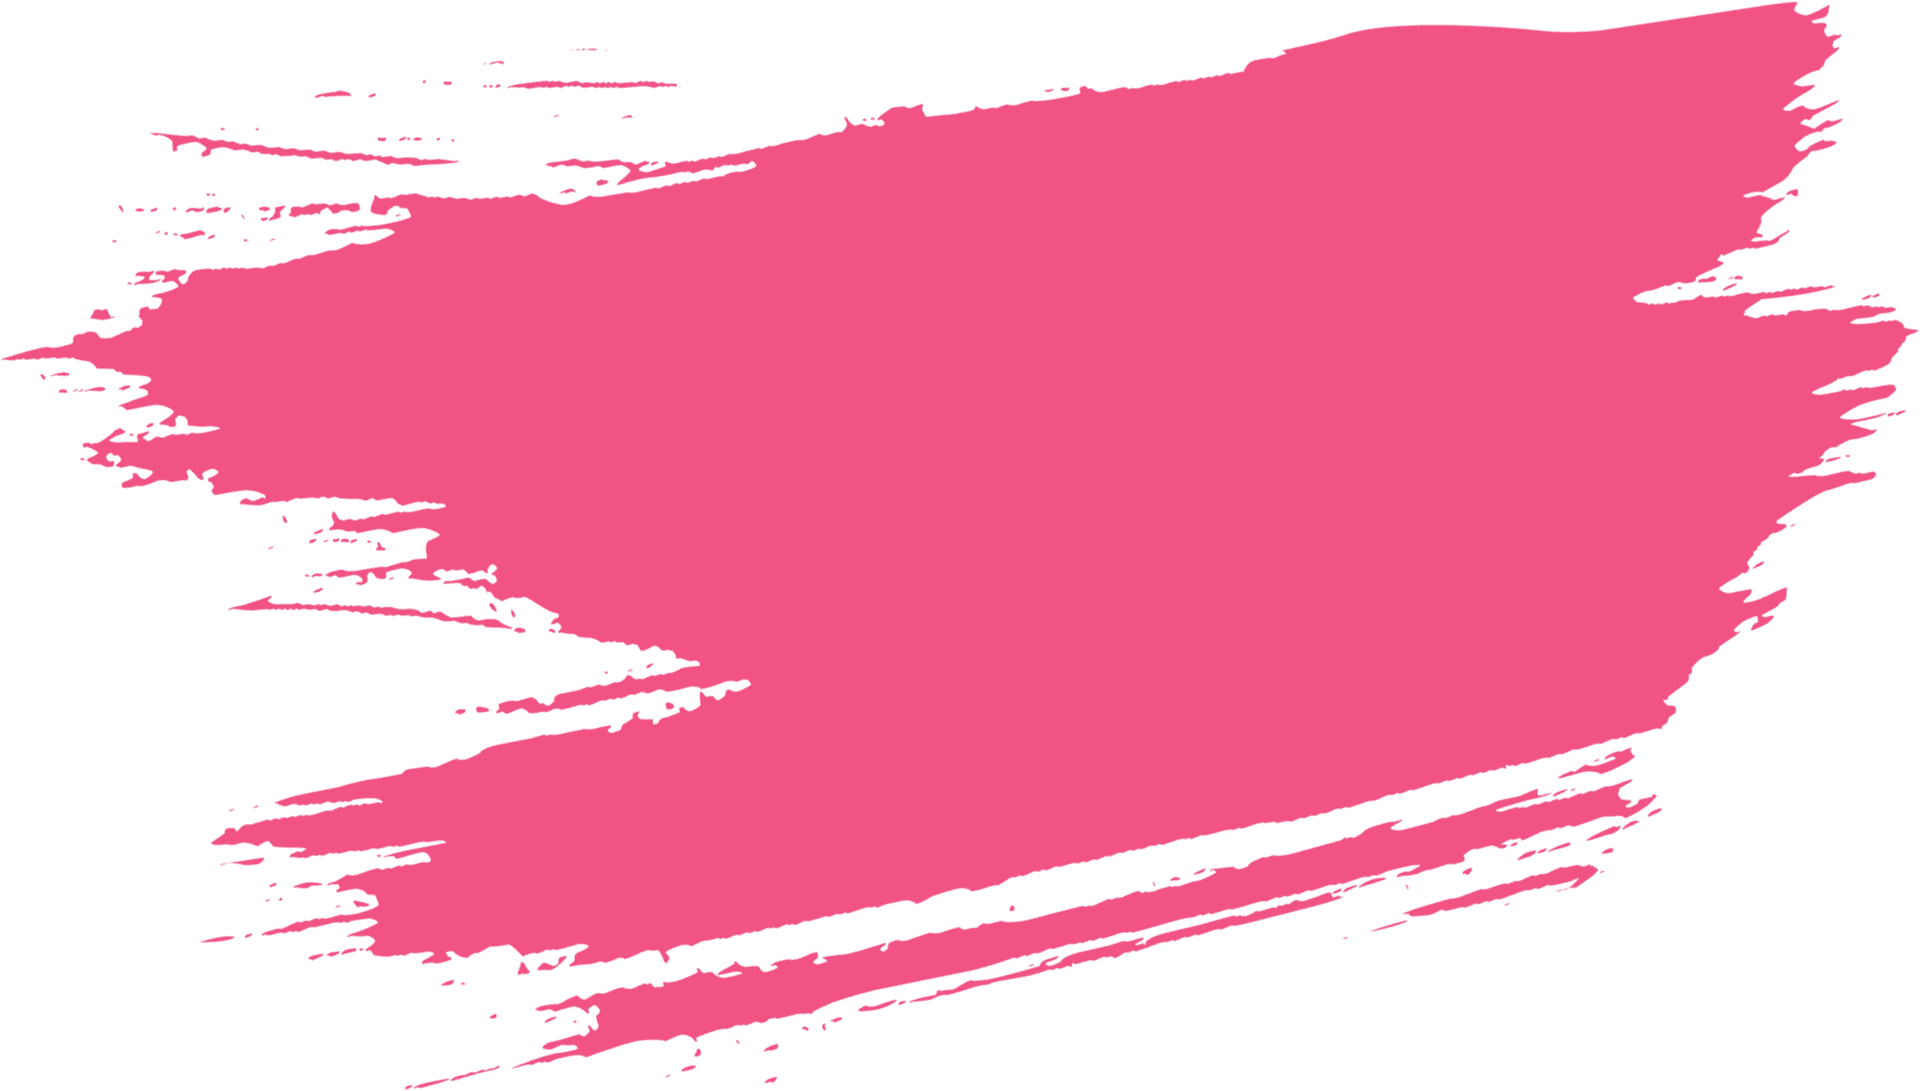 Pink Brush Stroke Texture PNG image